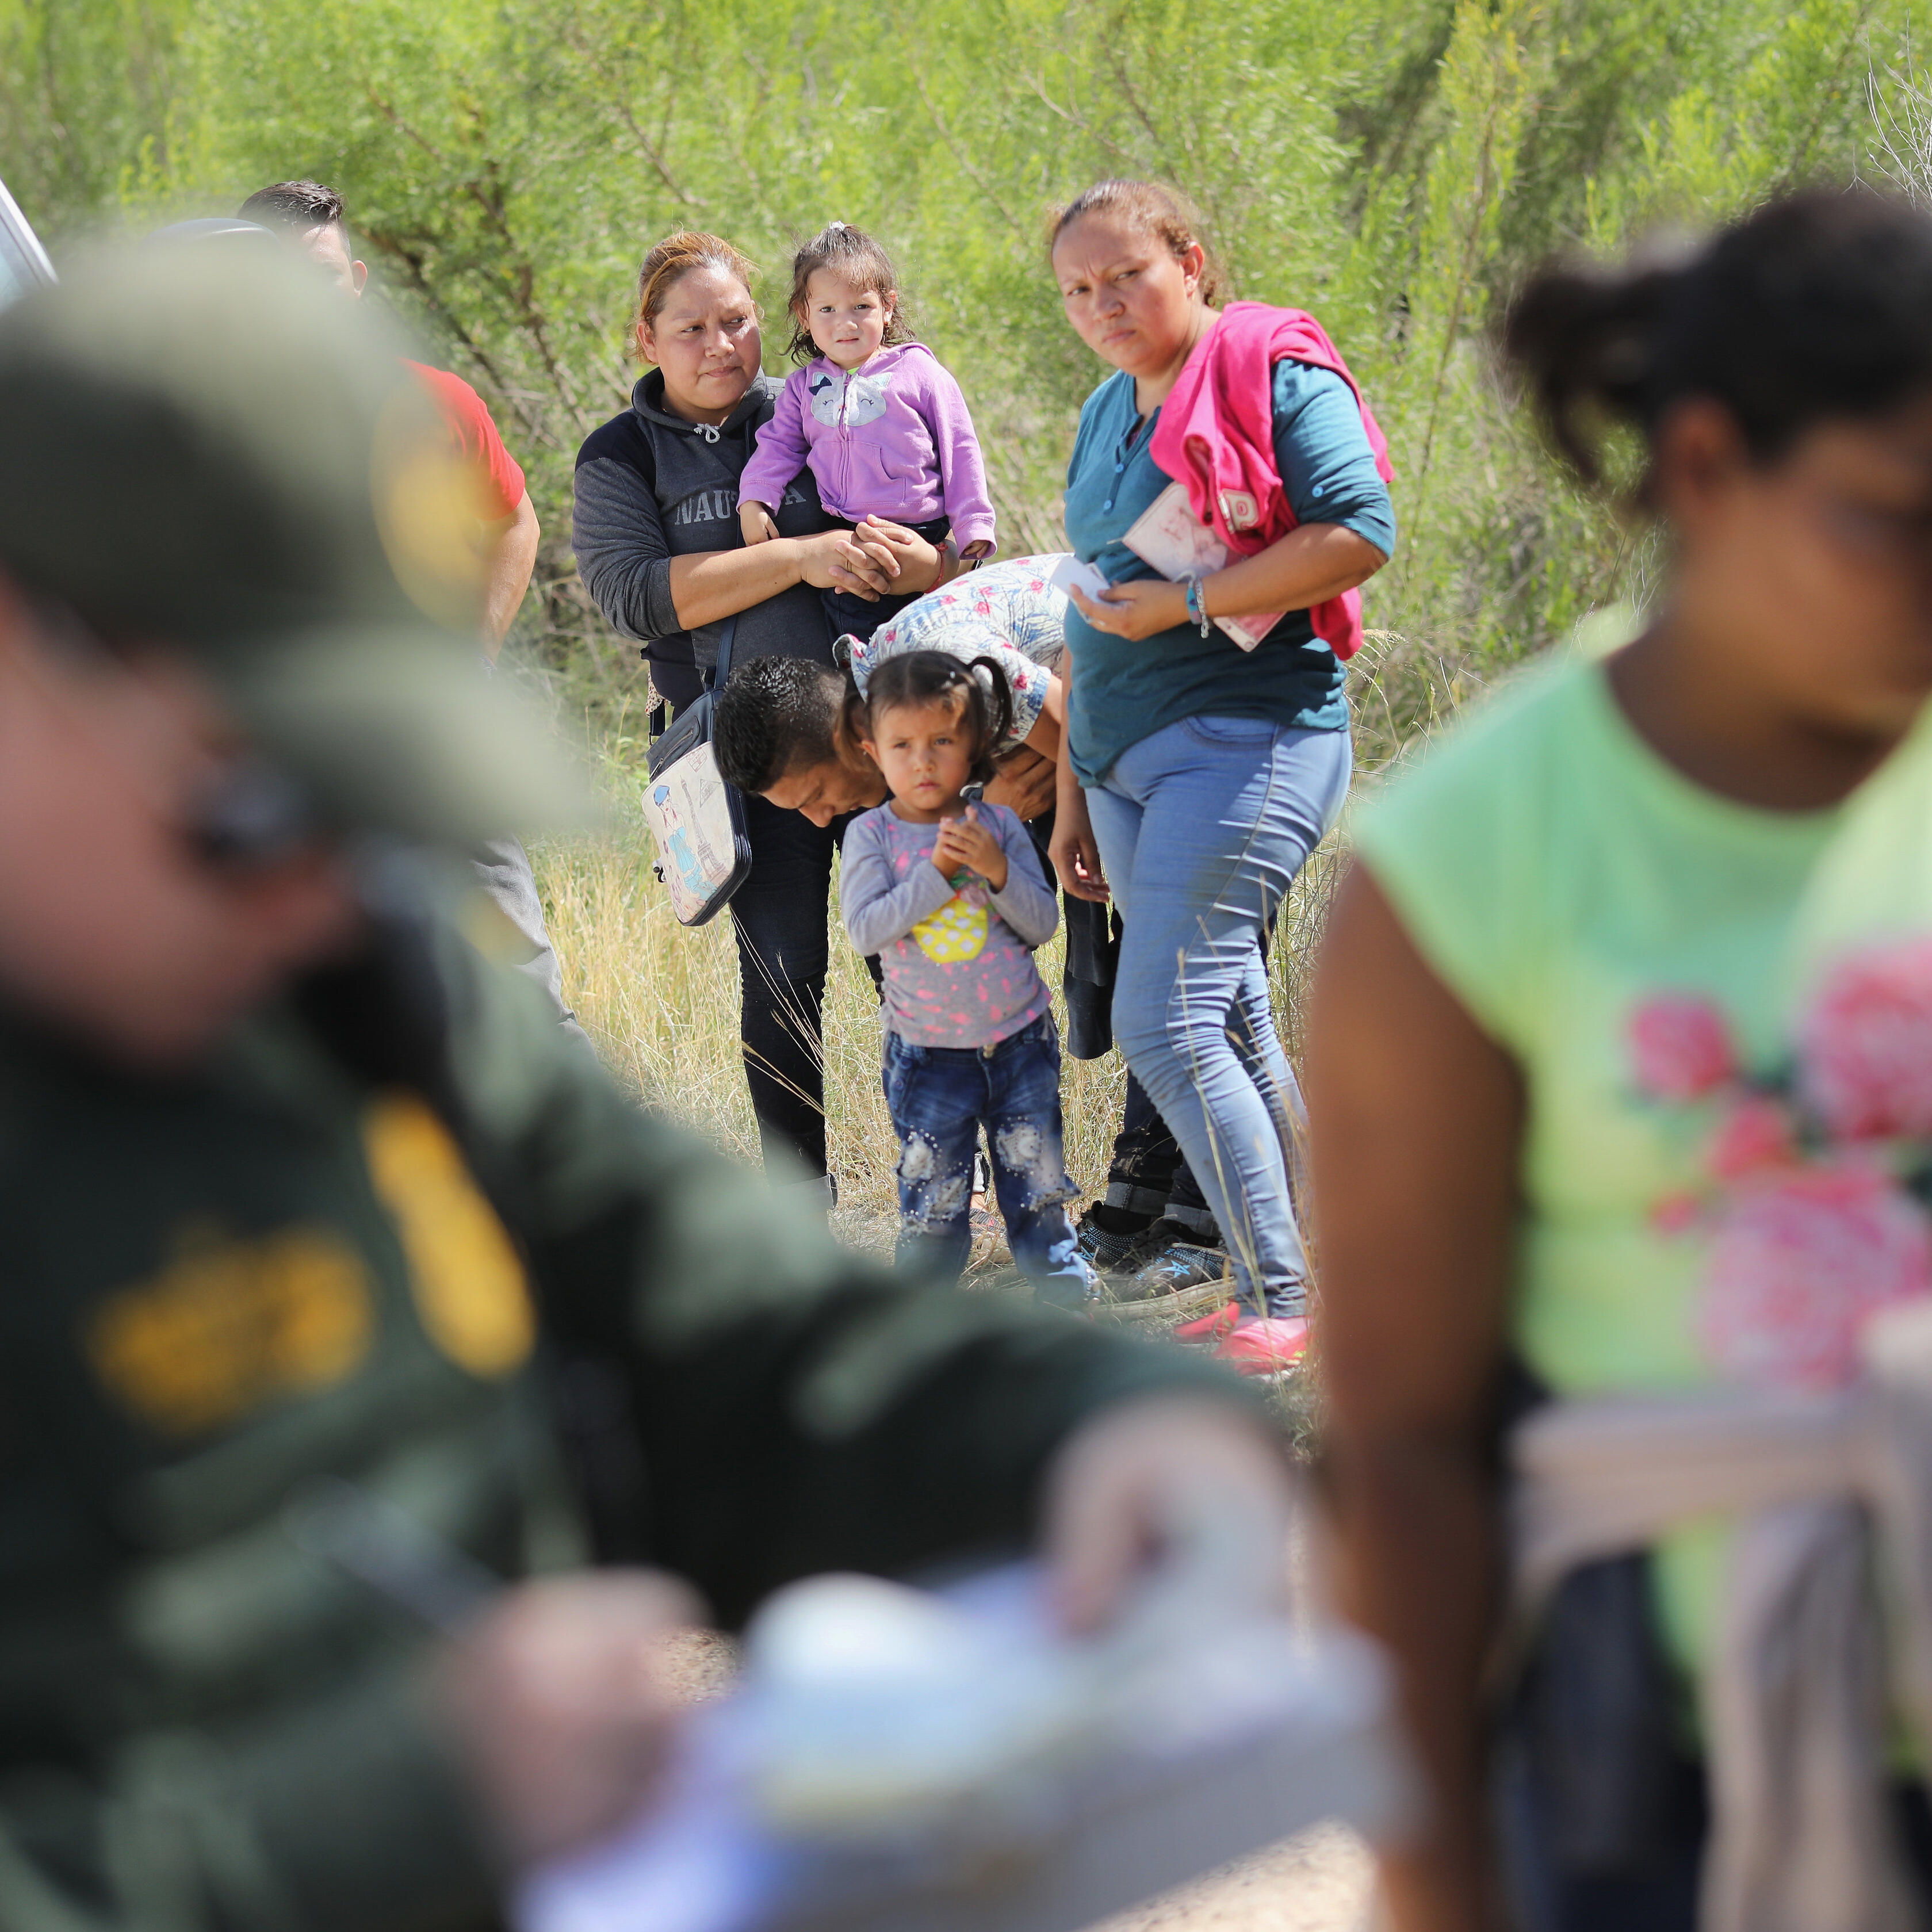 Central American asylum seekers wait as a U.S. Border Patrol agents take groups of them into custody on June 12, 2018 near McAllen, Texas. photo by John Moore/Getty Images